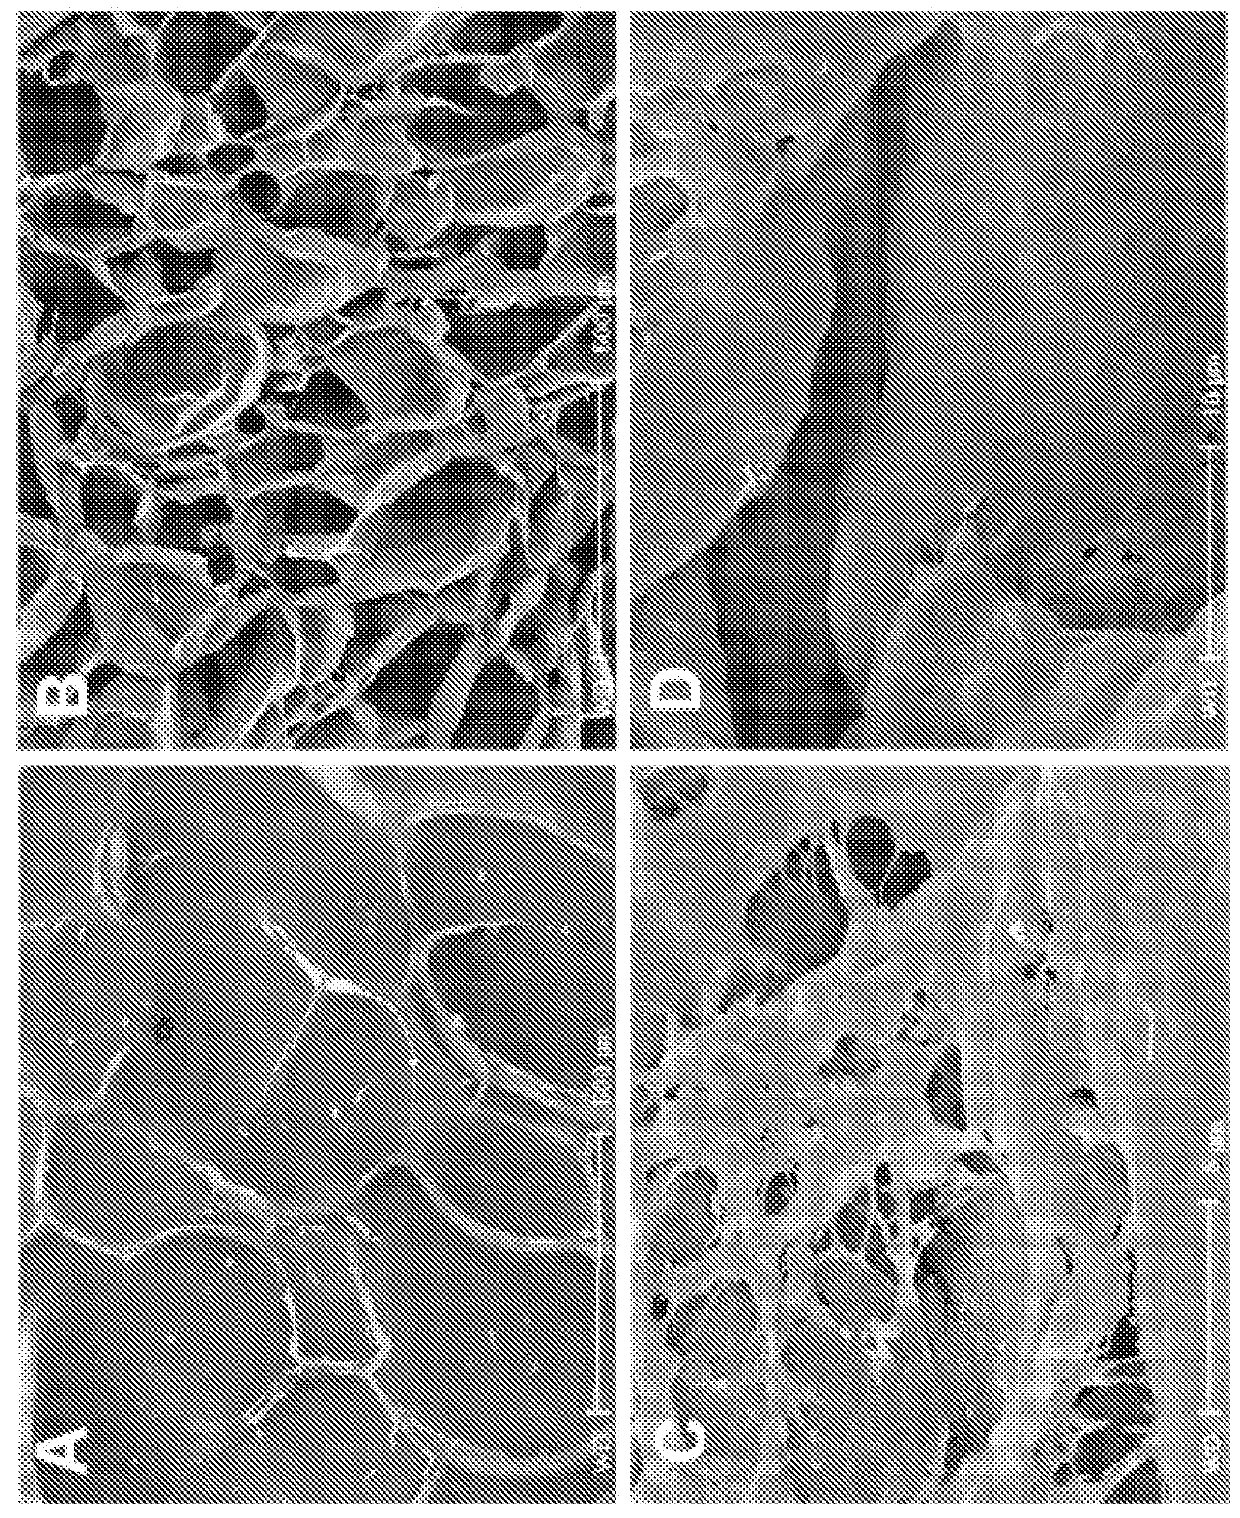 Glucomannan scaffolding for three-dimensional tissue culture and engineering